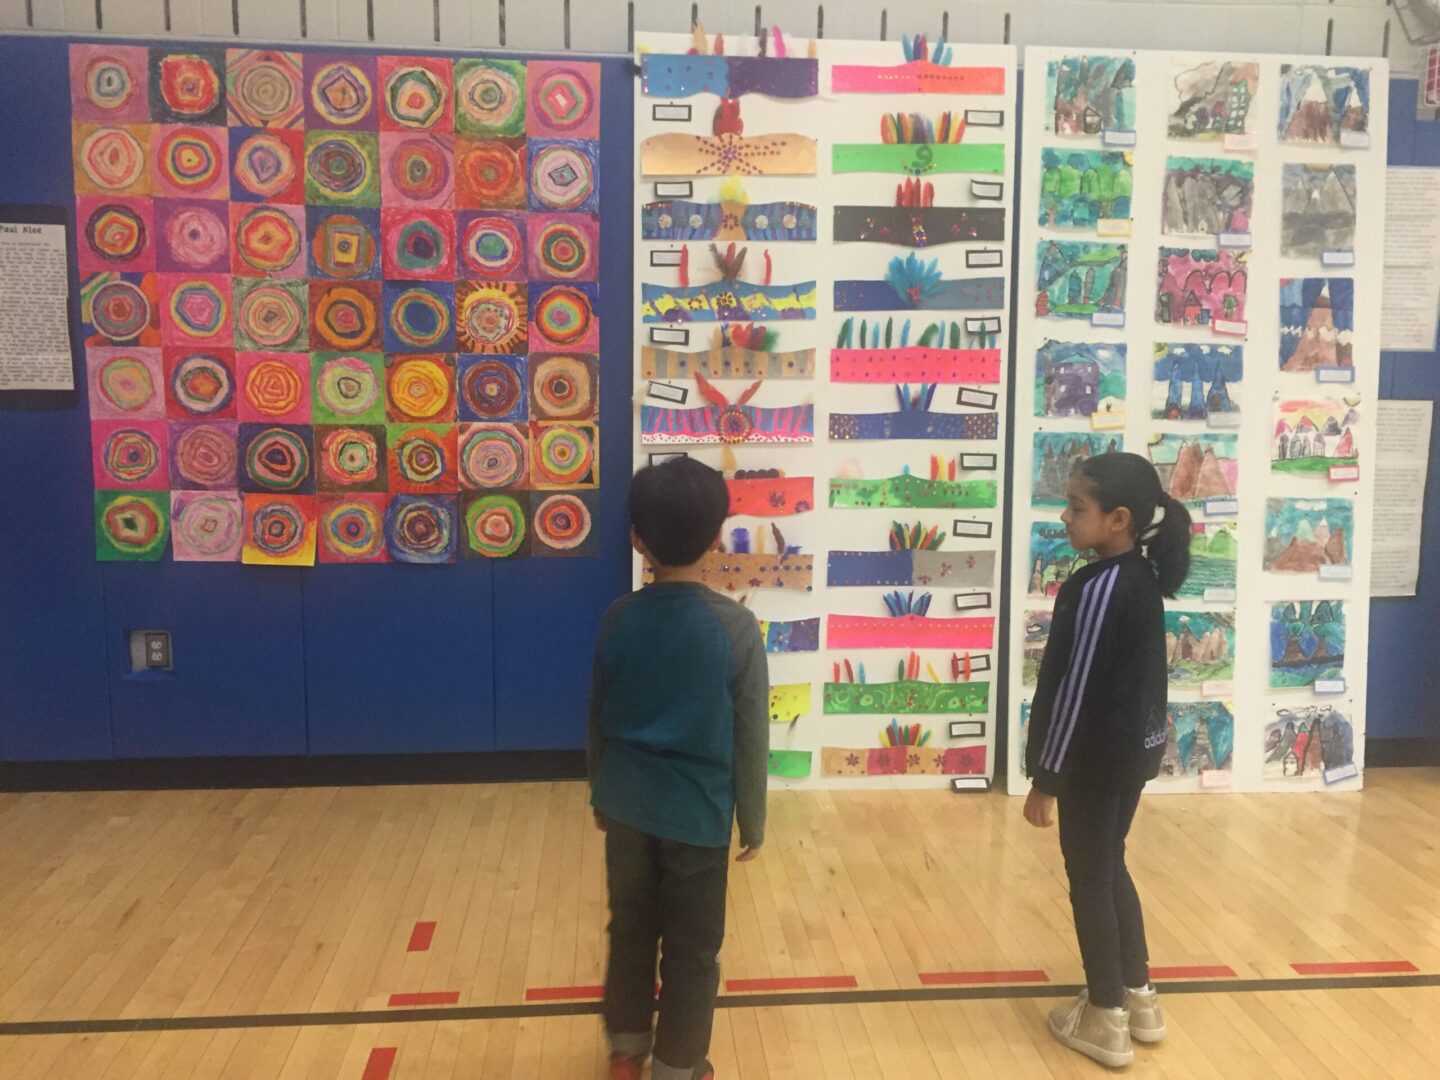 Two children standing in front of a display of art work.